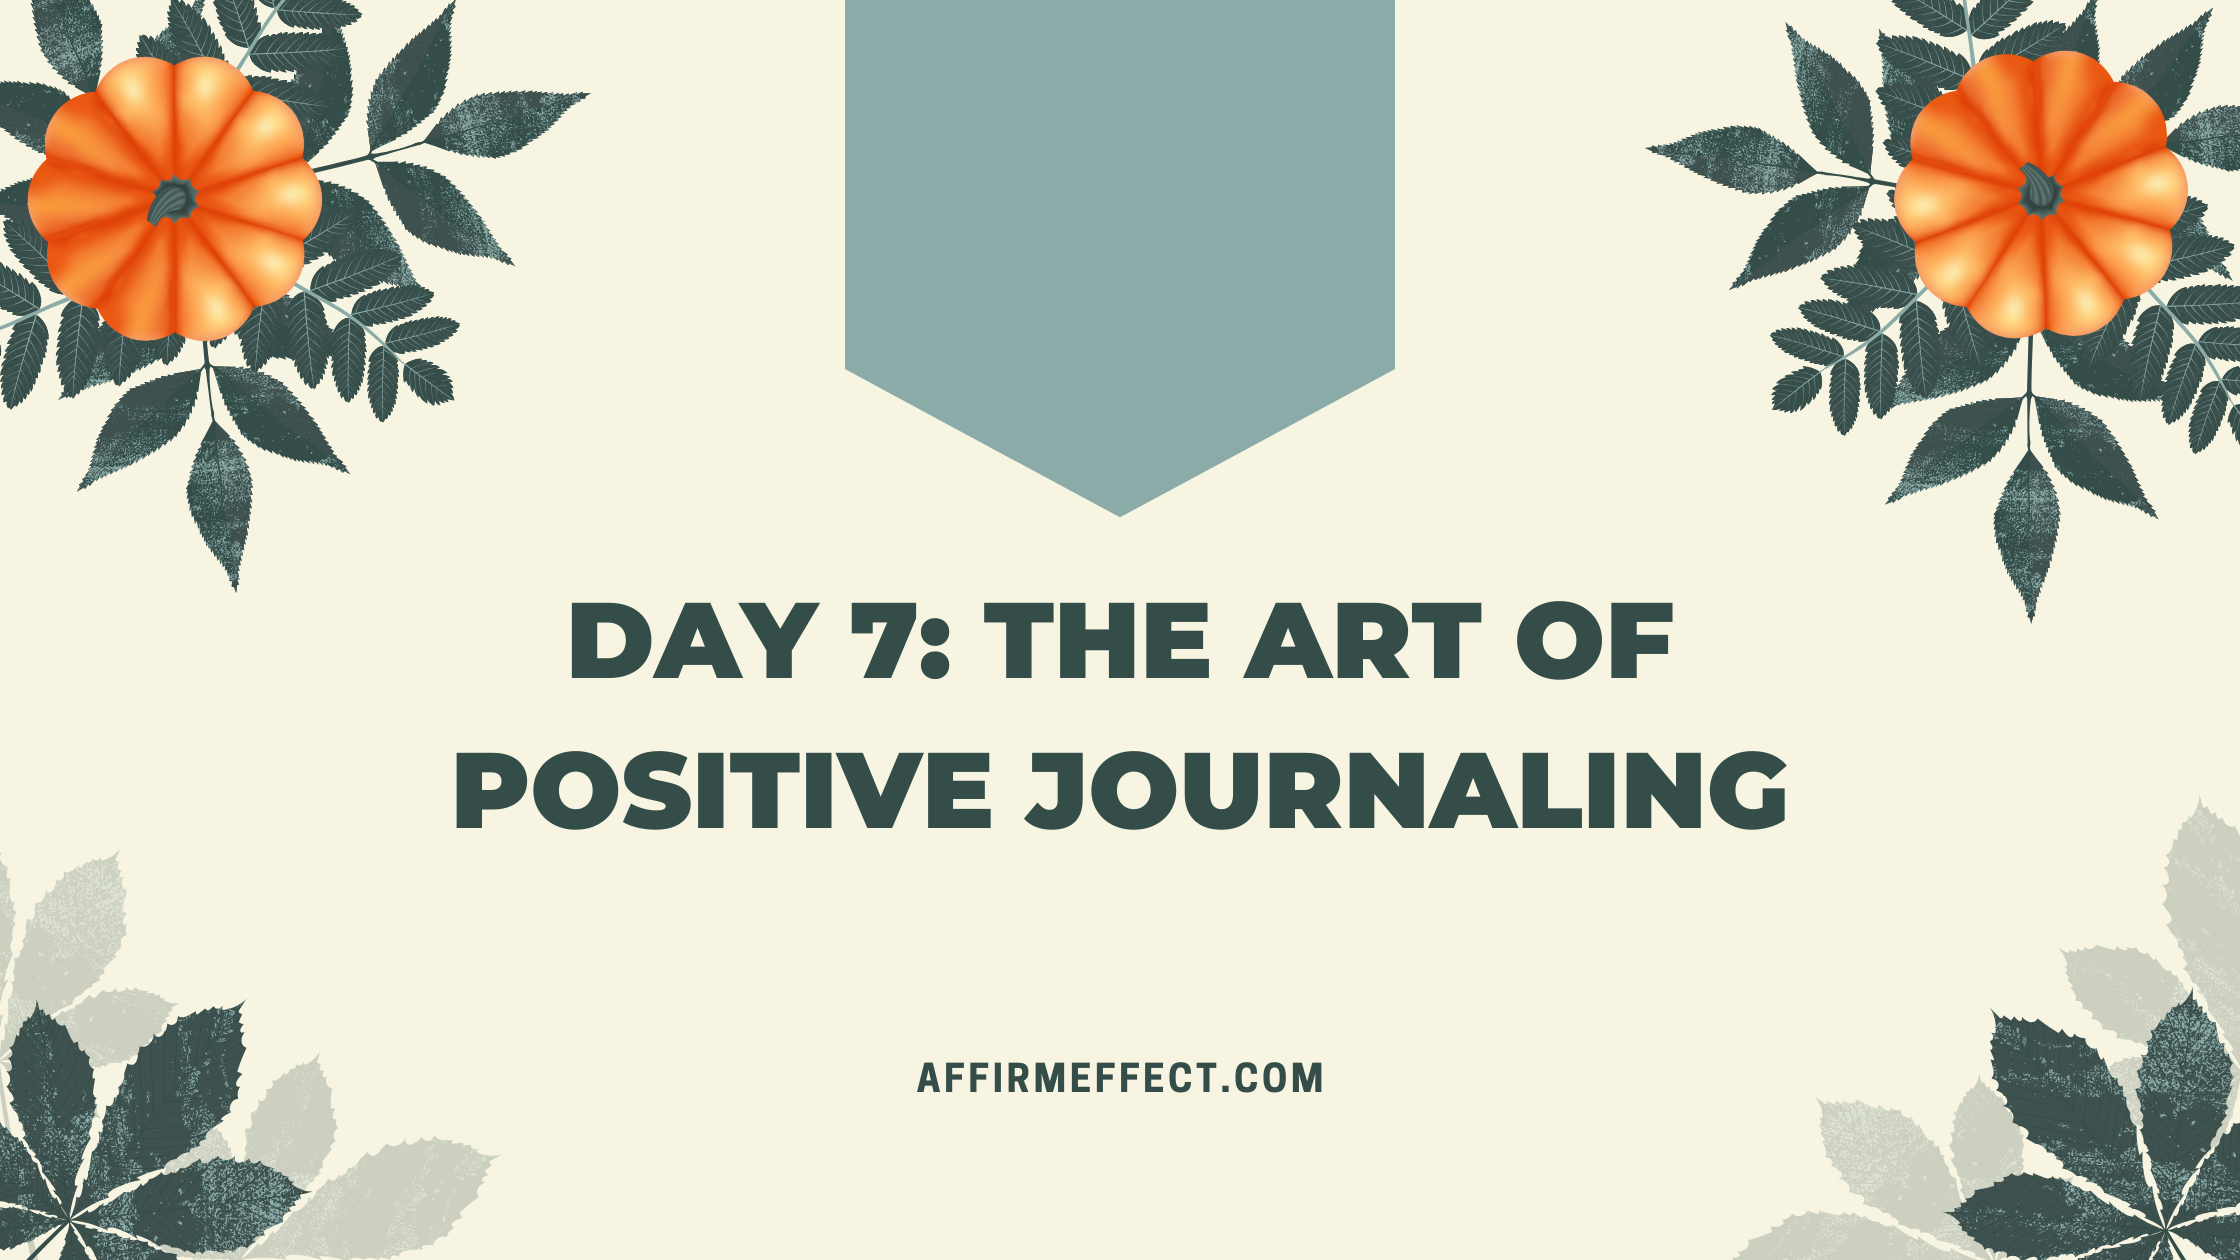 Day 7: The Art of Positive Journaling: A Daily Dose of Self-Reflection and Growth